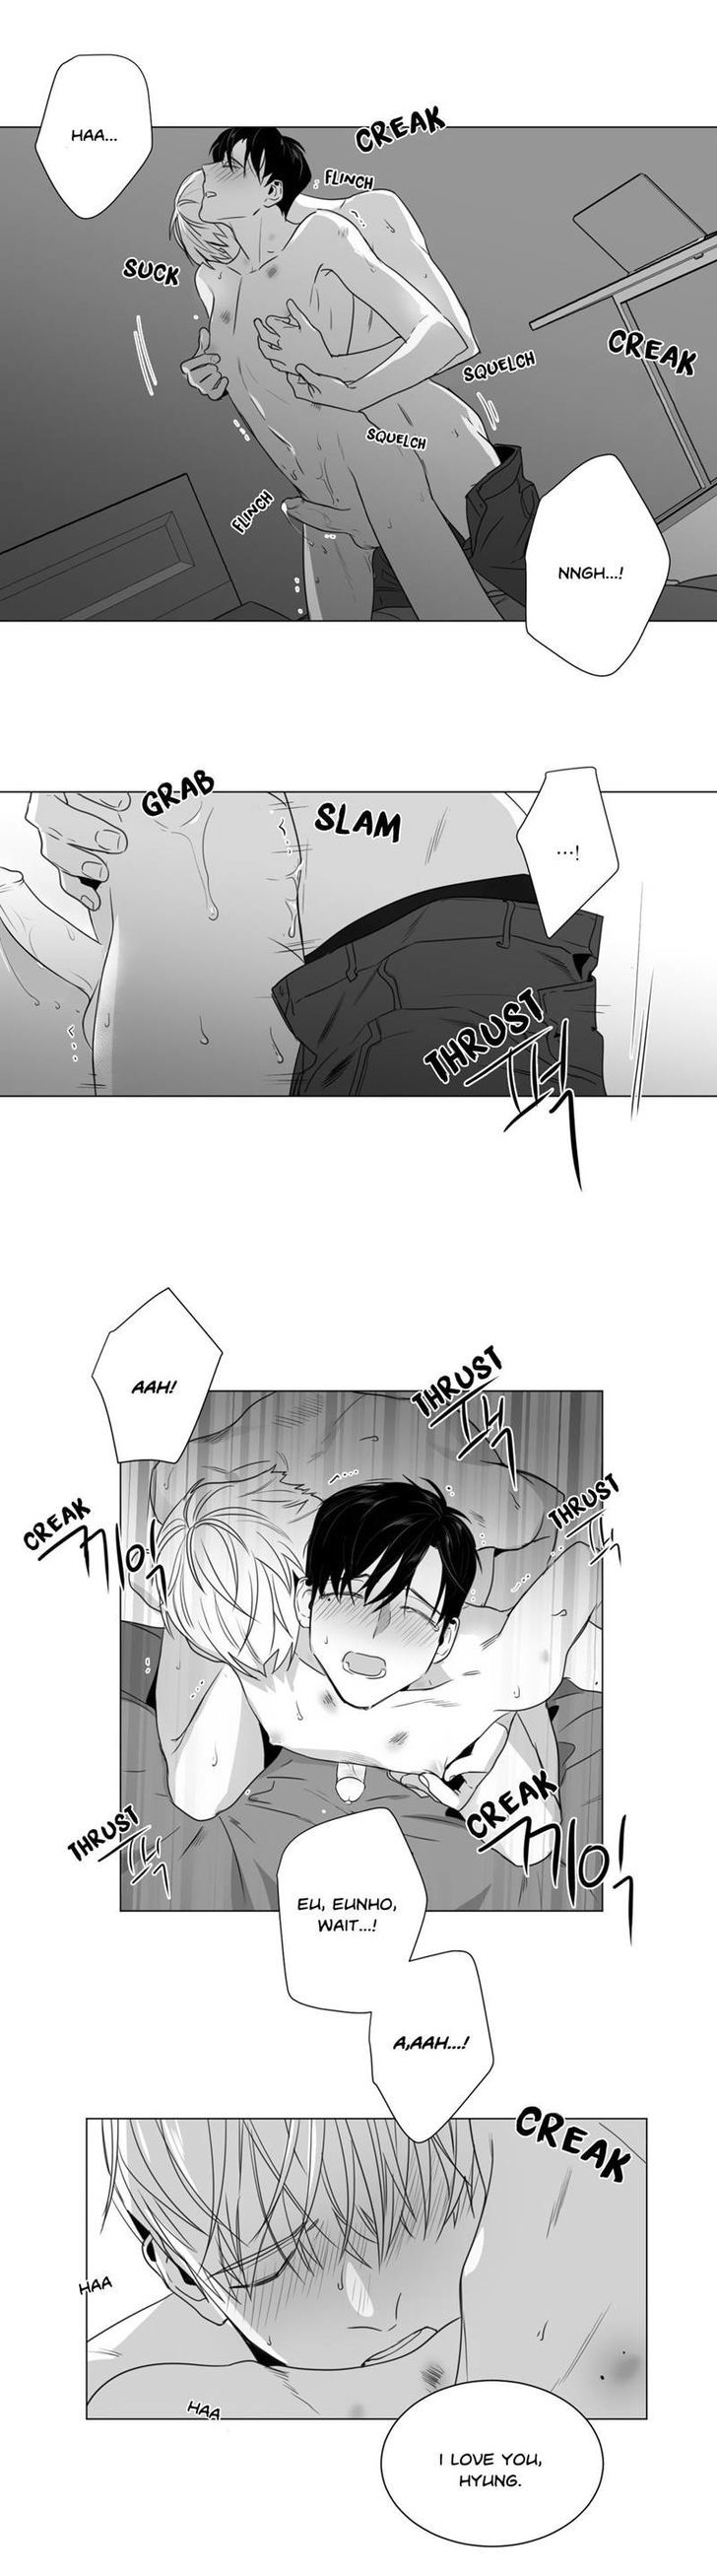 Lover Boy (Lezhin) Chapter 030 page 7